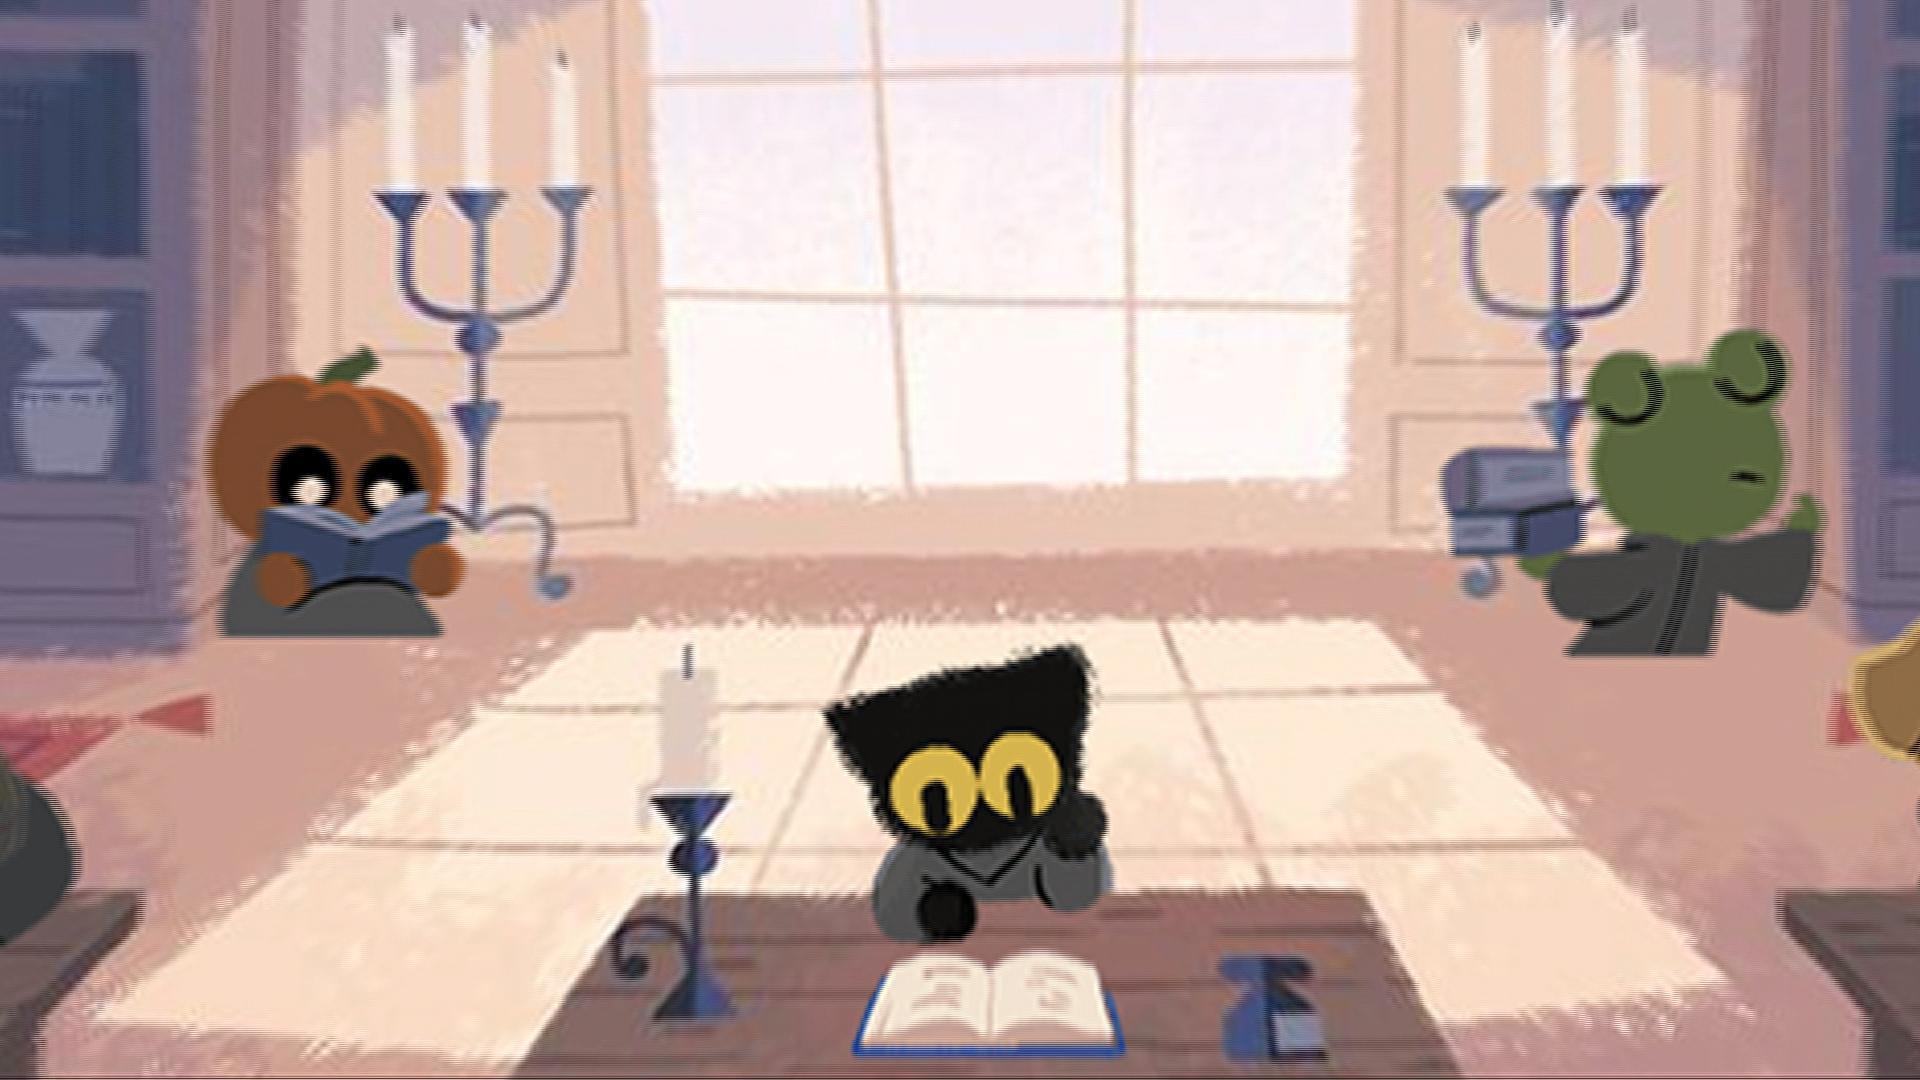 Halloween Google Doodle Brings Back Momo For New Magic Cat Academy